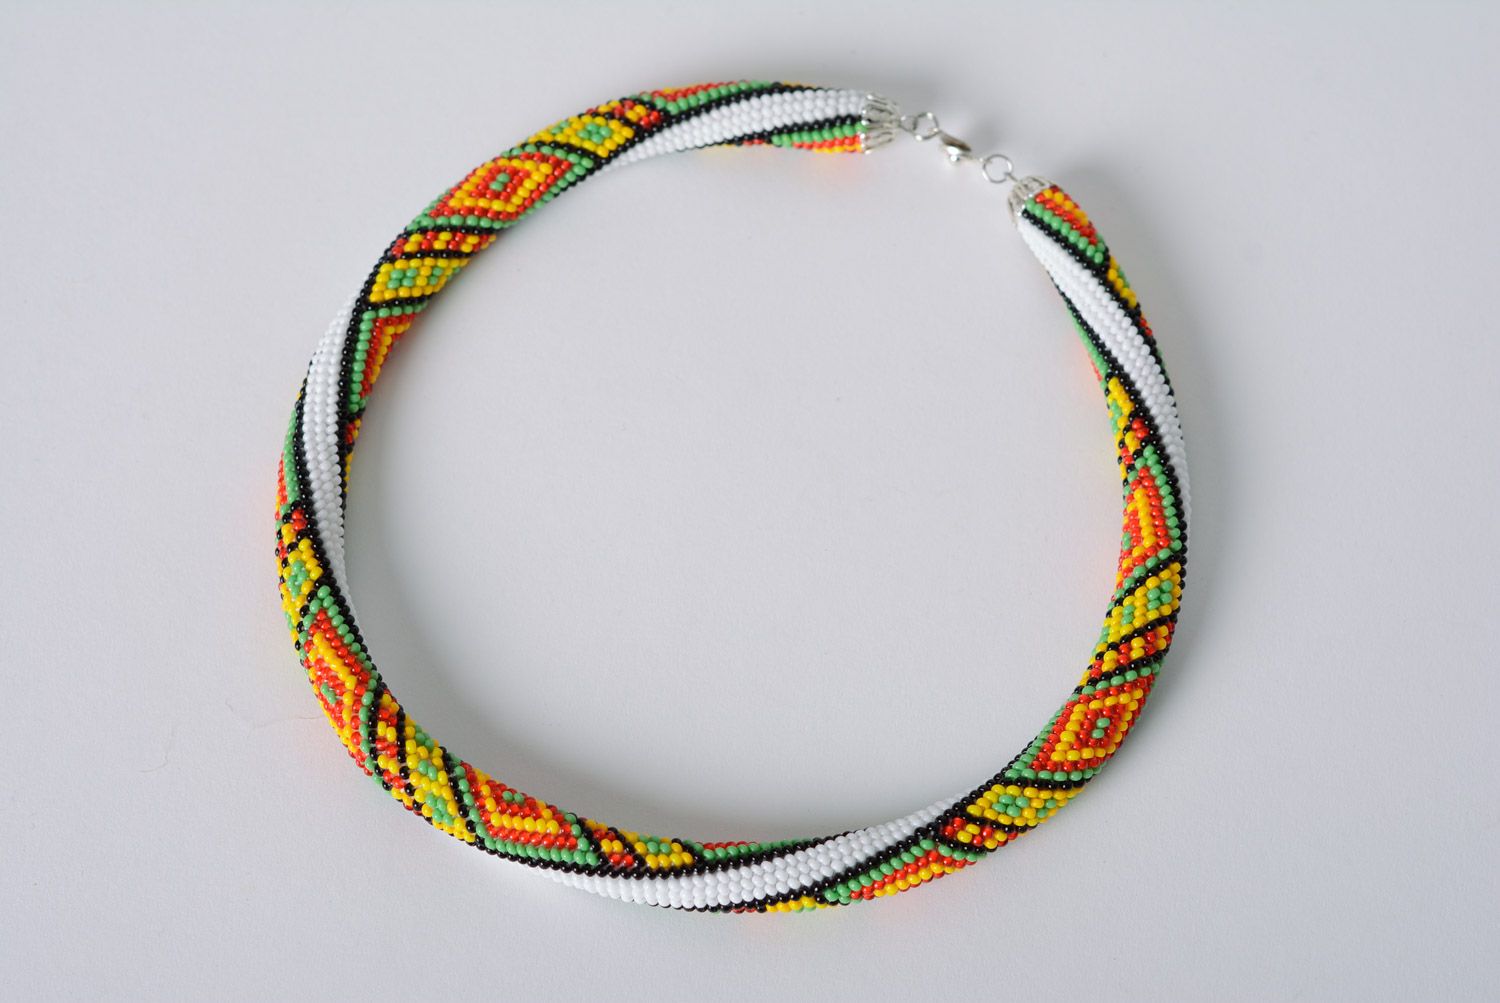 Festive handmade woven beaded cord necklace with geometric pattern photo 1